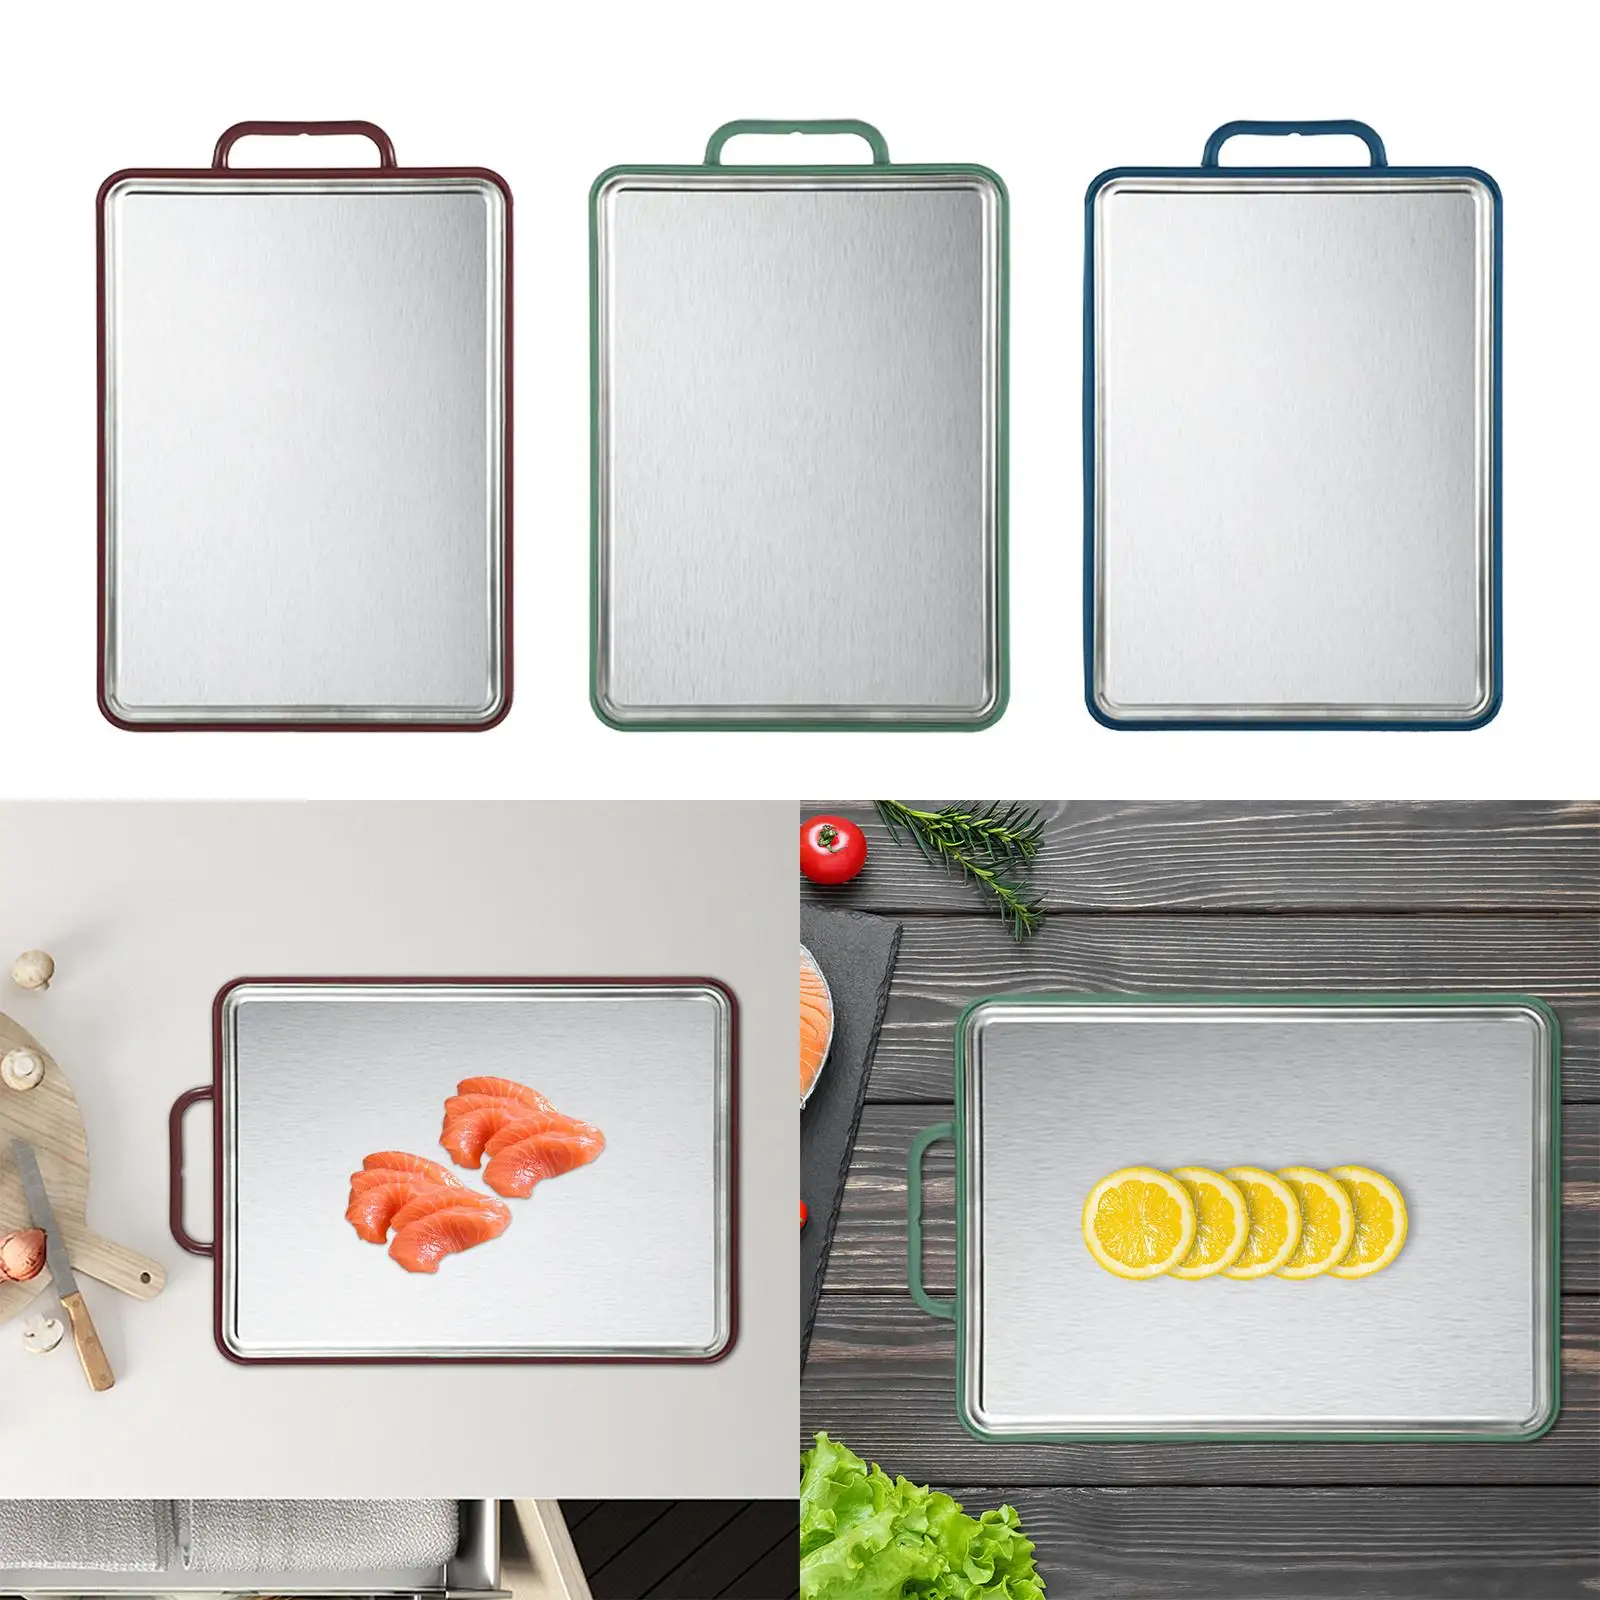 Double Sided Cutting Board Chopping Board for Meat Vegetable Fruit Convenient Cleaning Food Grade Material Simple Tray Durable